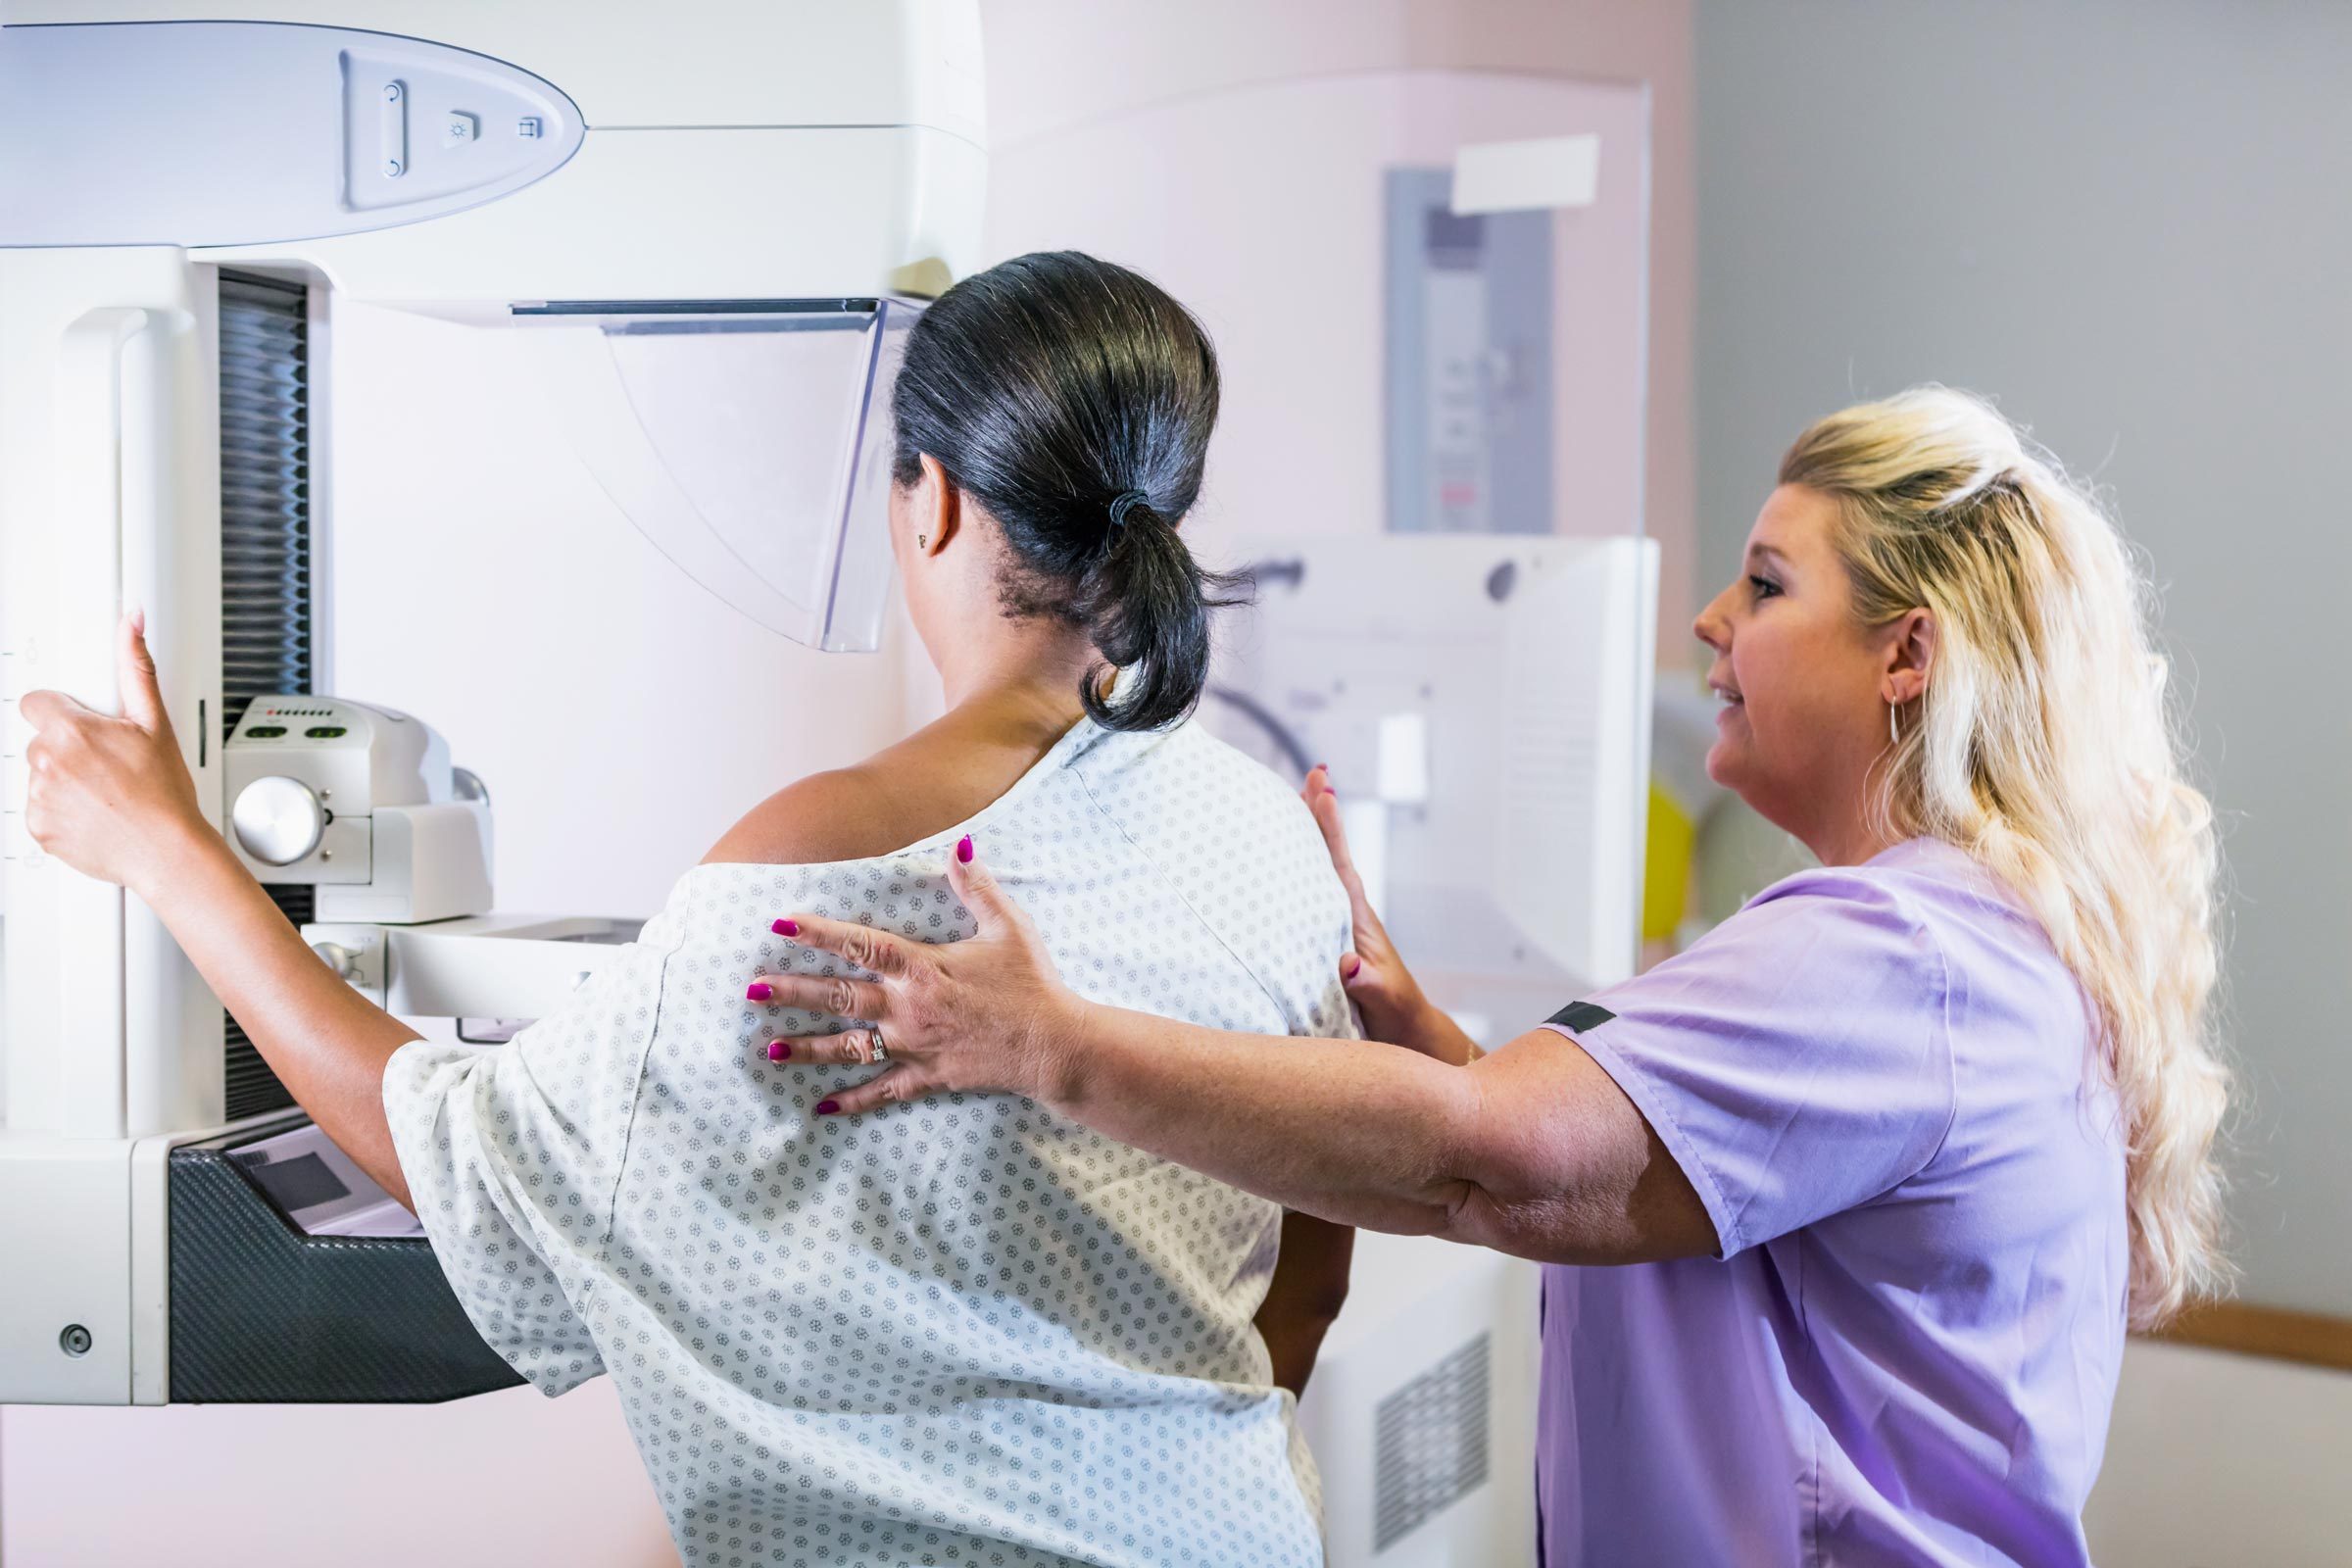 Major Changes To Breast Cancer Screening Recommendations|